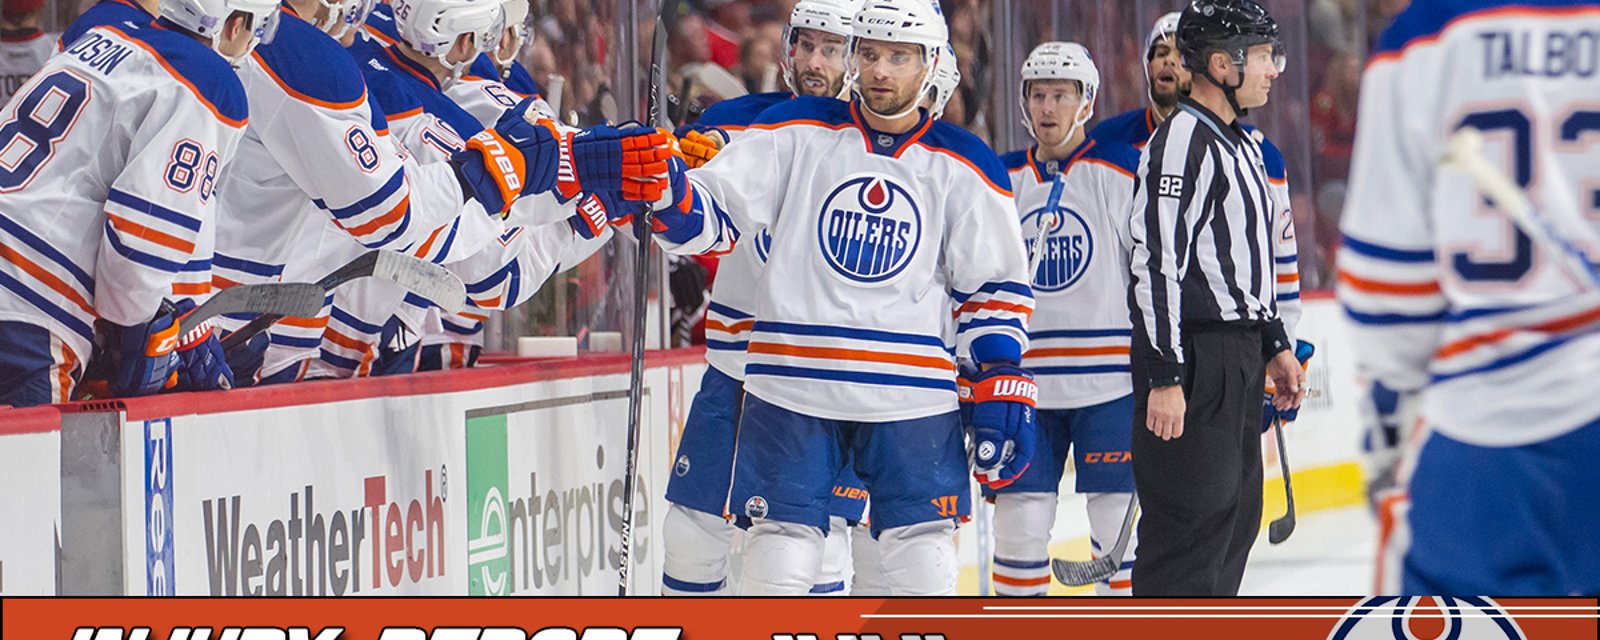 BREAKING: Oilers lose CRITICAL player for rest of series